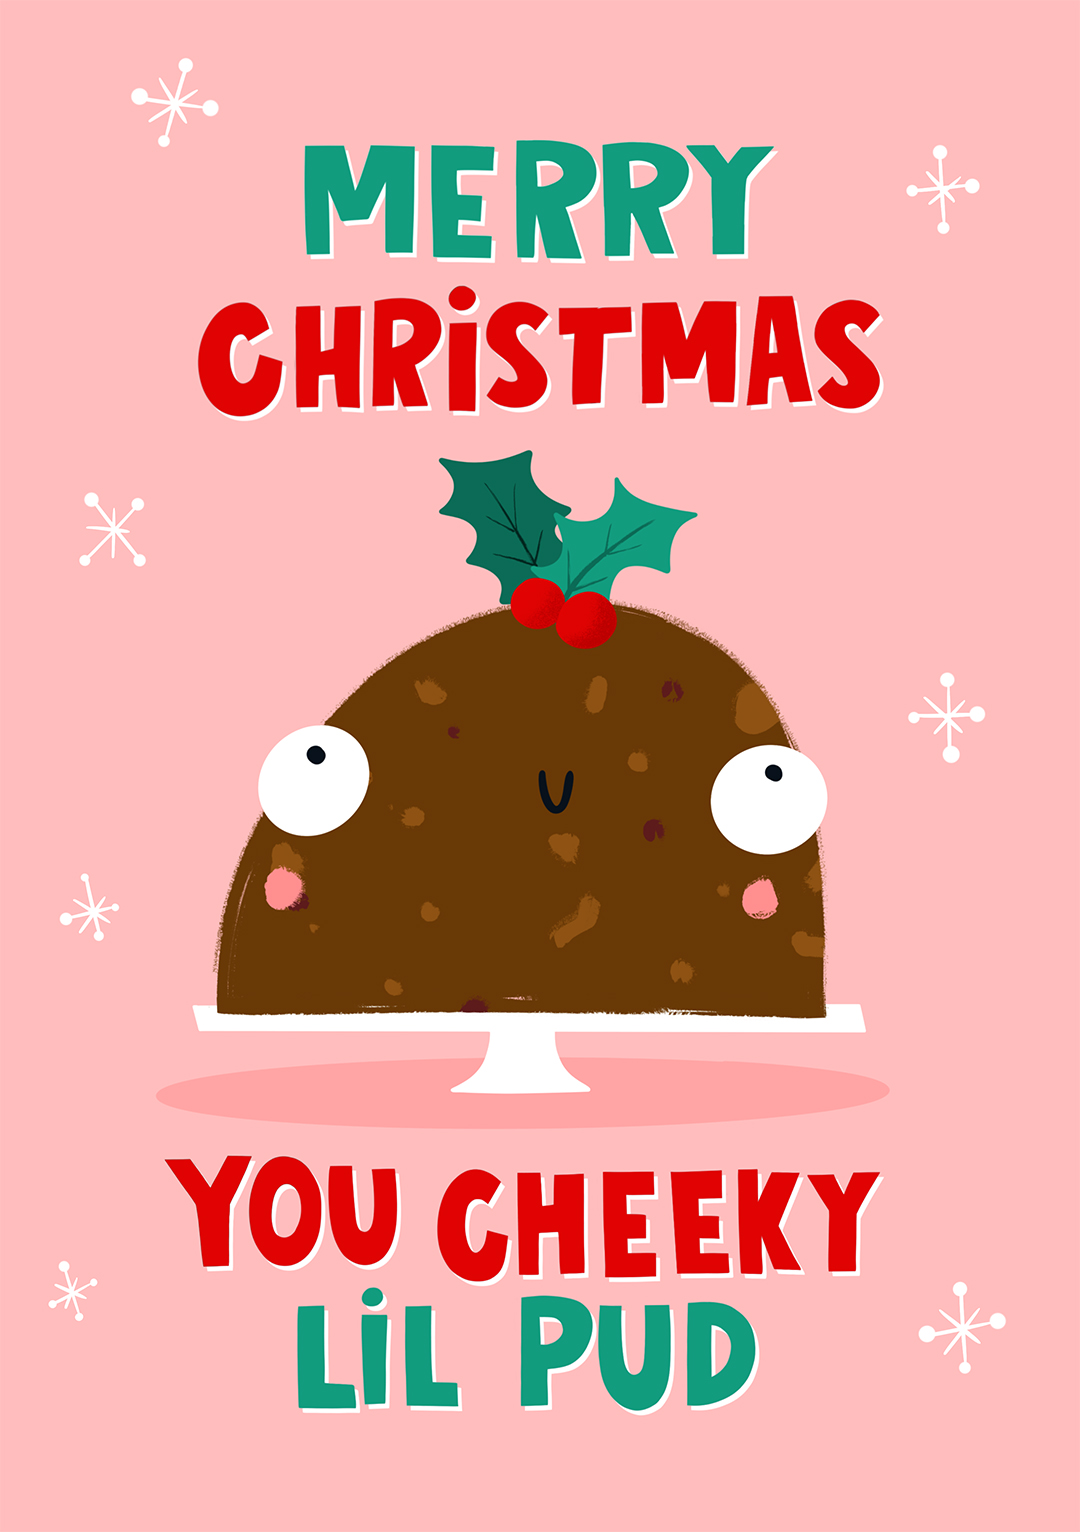 Merry Christmas You Cheeky Lil Pud card